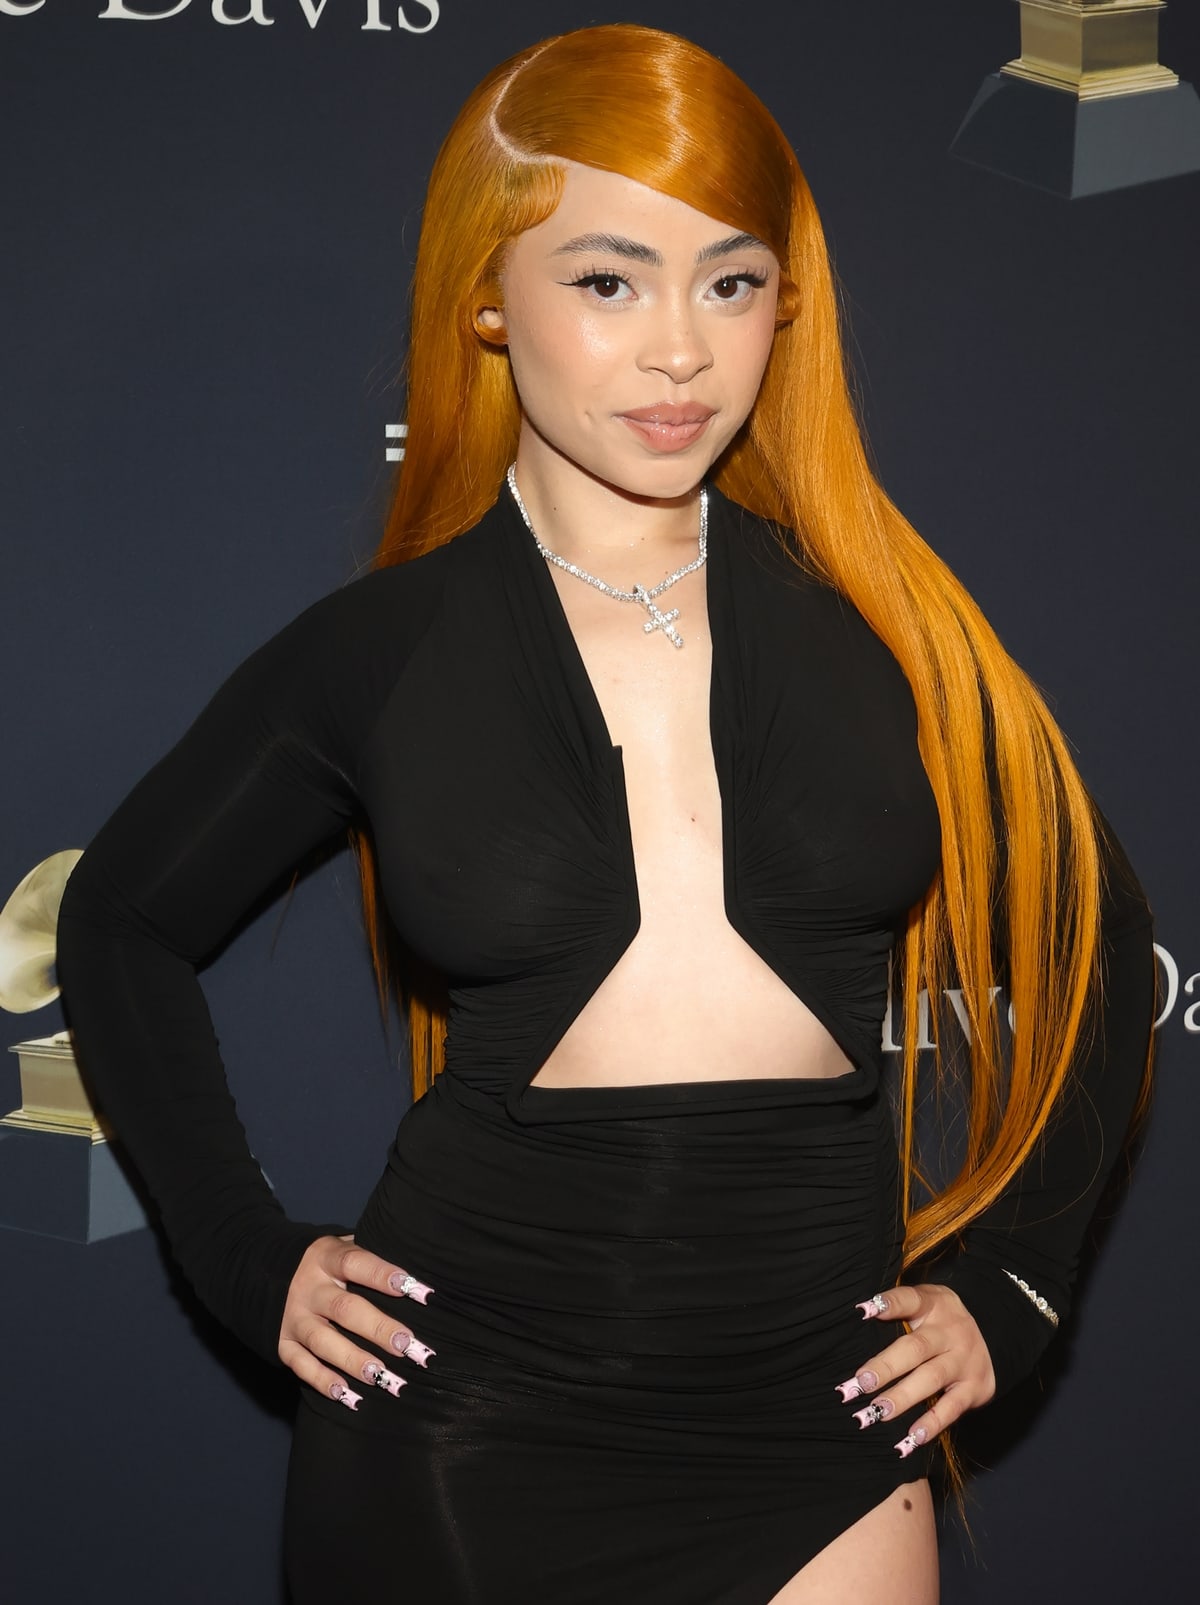 Accented with diamond jewelry and her iconic orange hair styled sleekly, Ice Spicec epitomizes glamour and confidence, staying true to her unique aesthetic